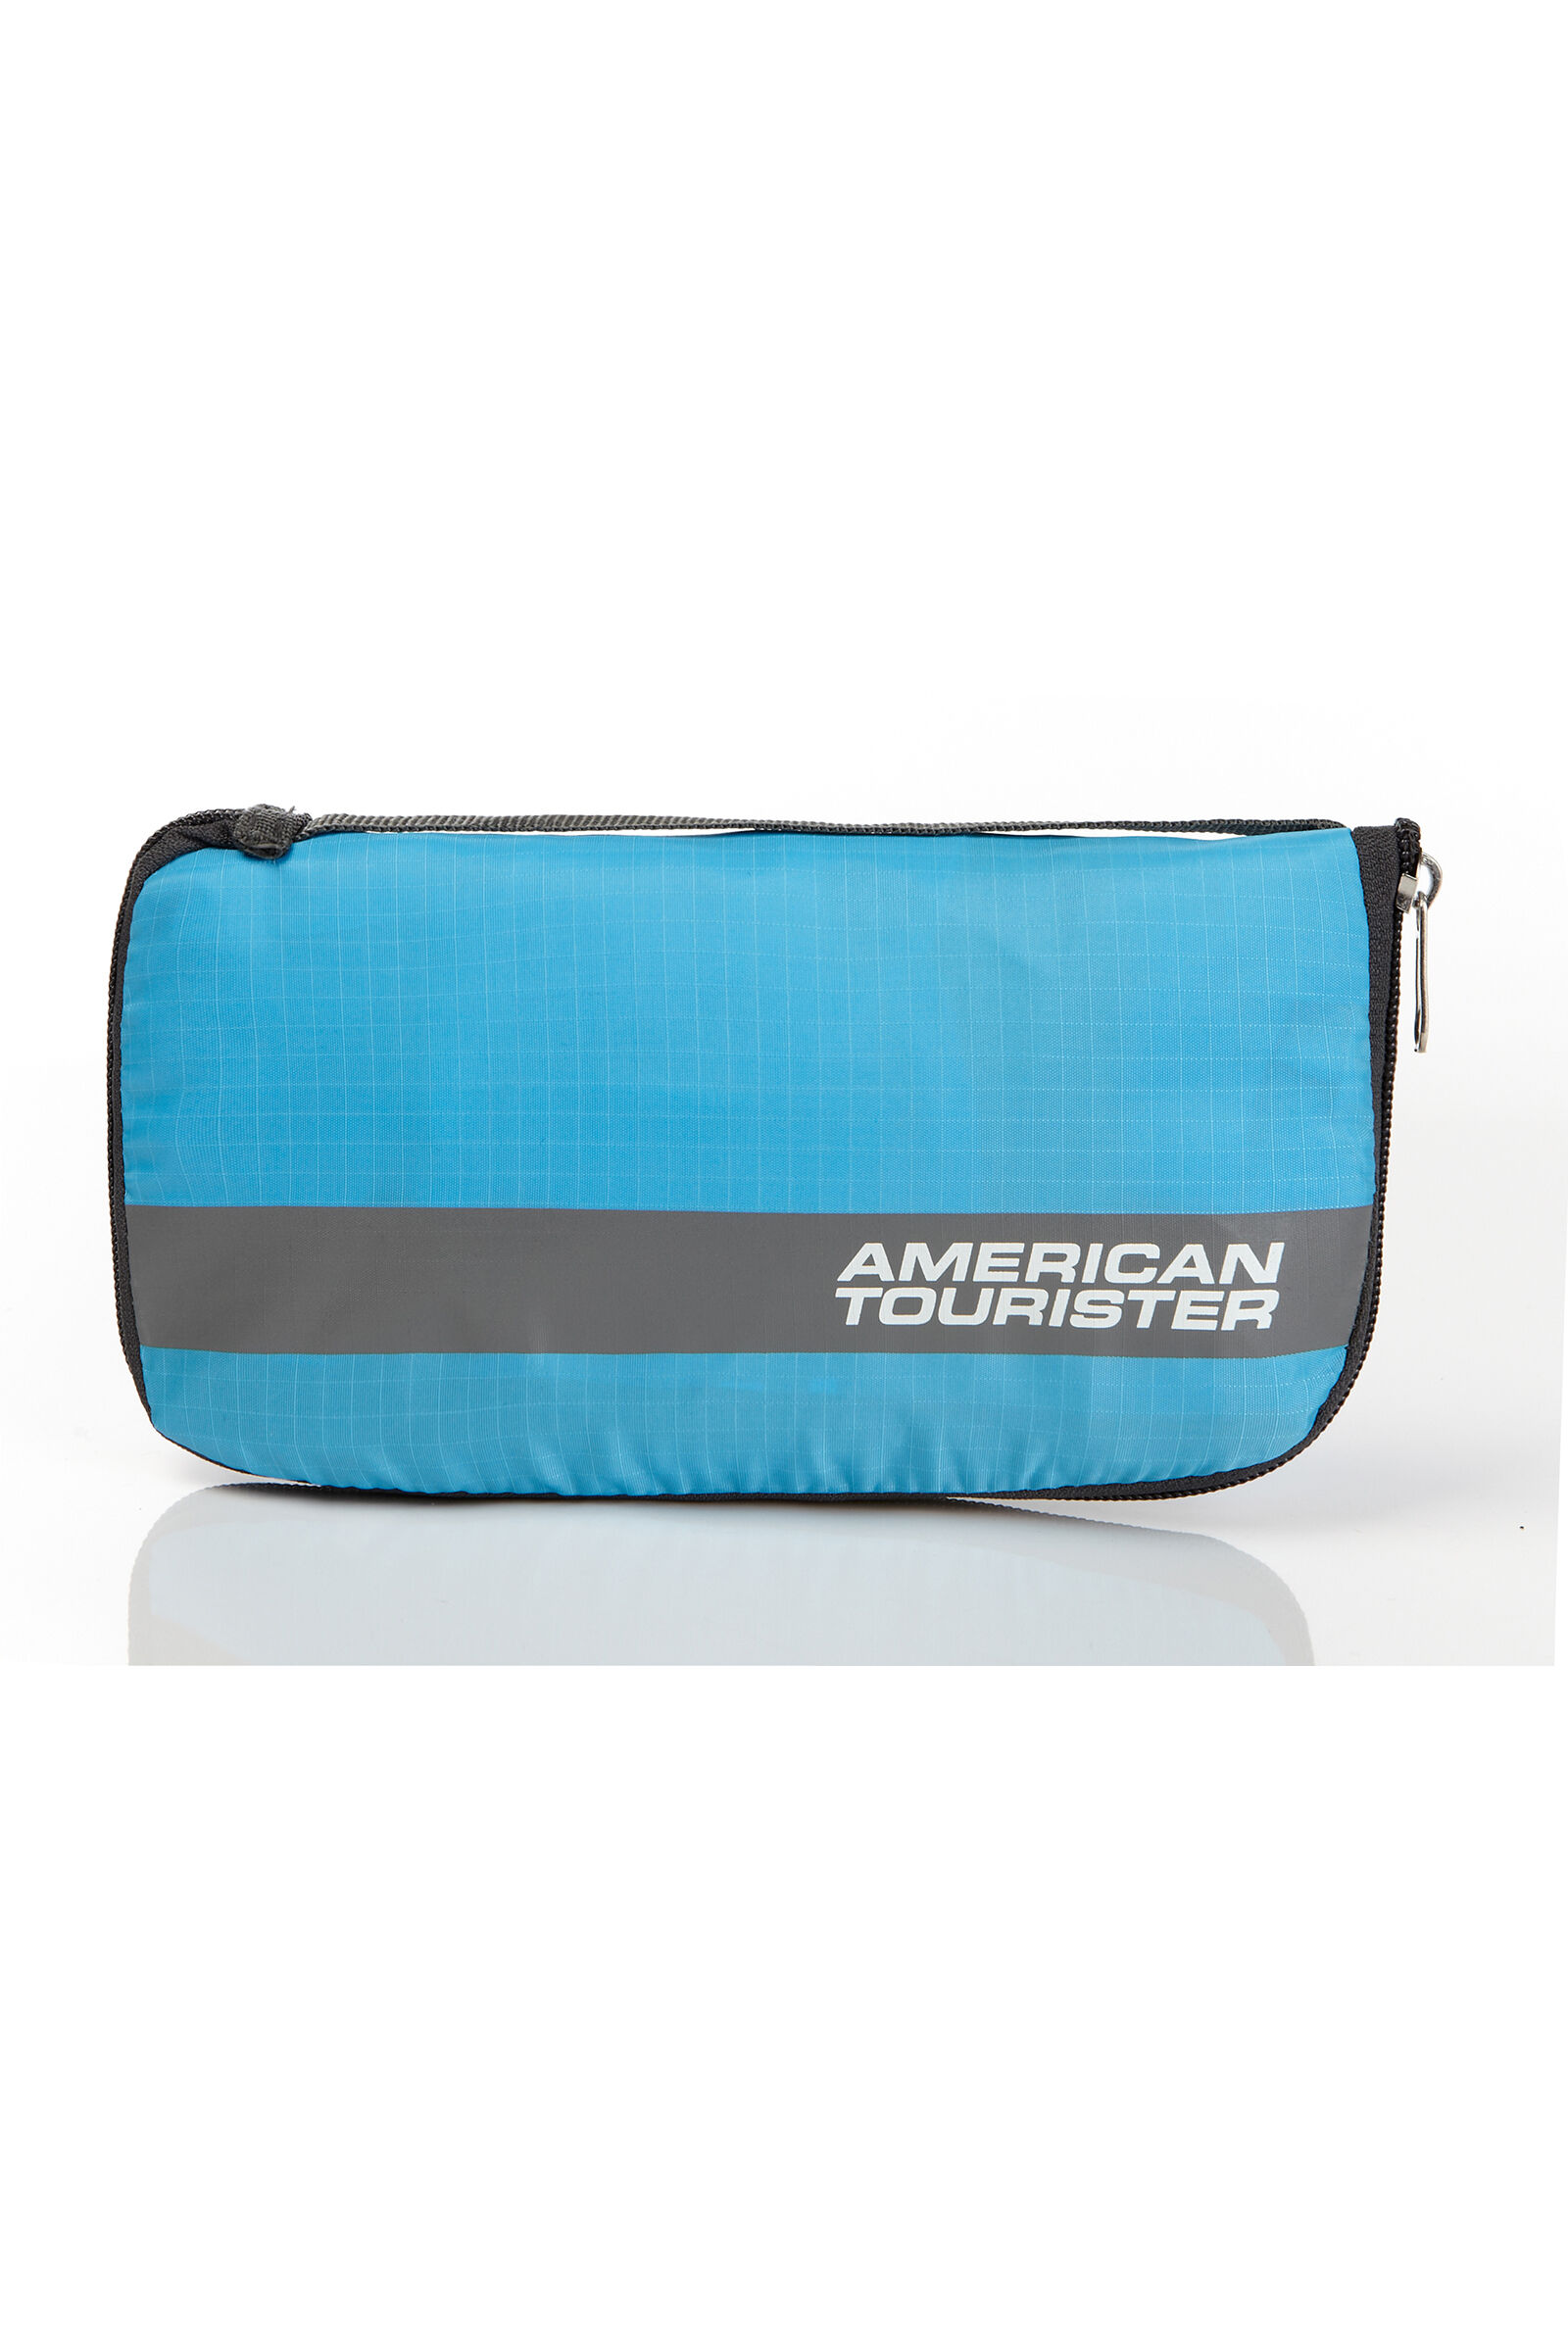 American Tourister At Accessories Foldable Lug. Cover Ii M